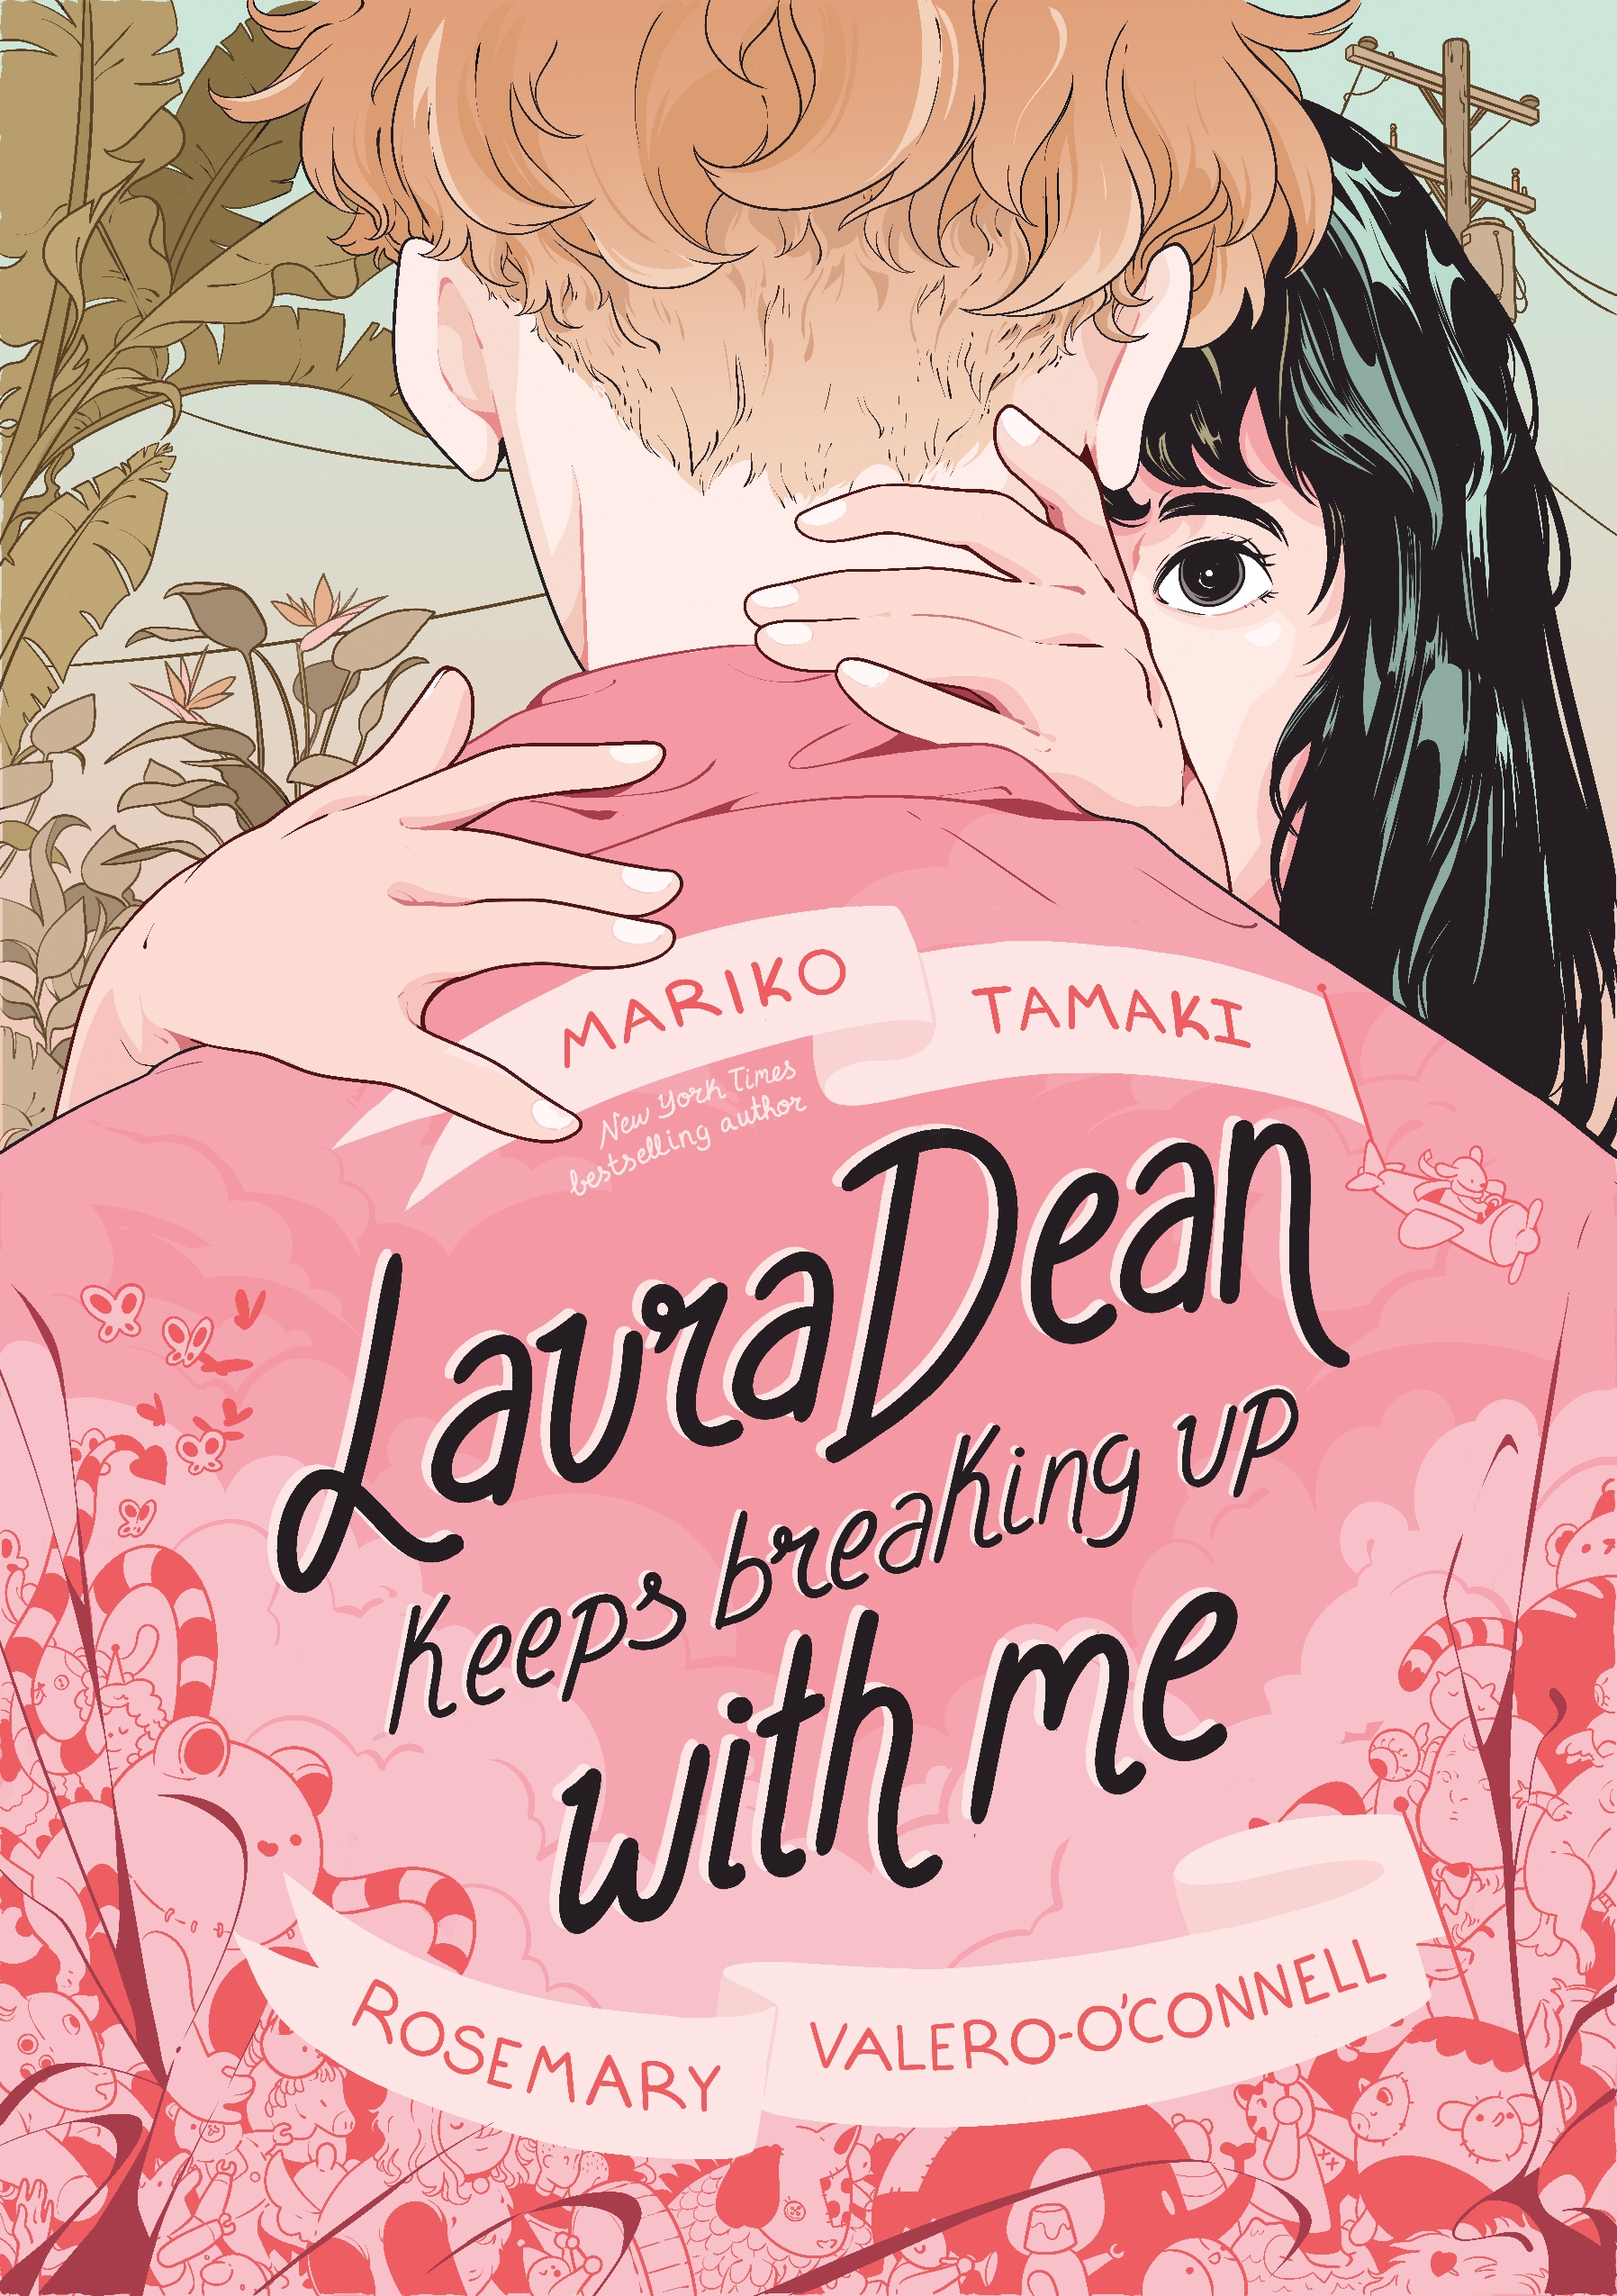 Laura Dean Keeps Breaking Up with Me [electronic resource]